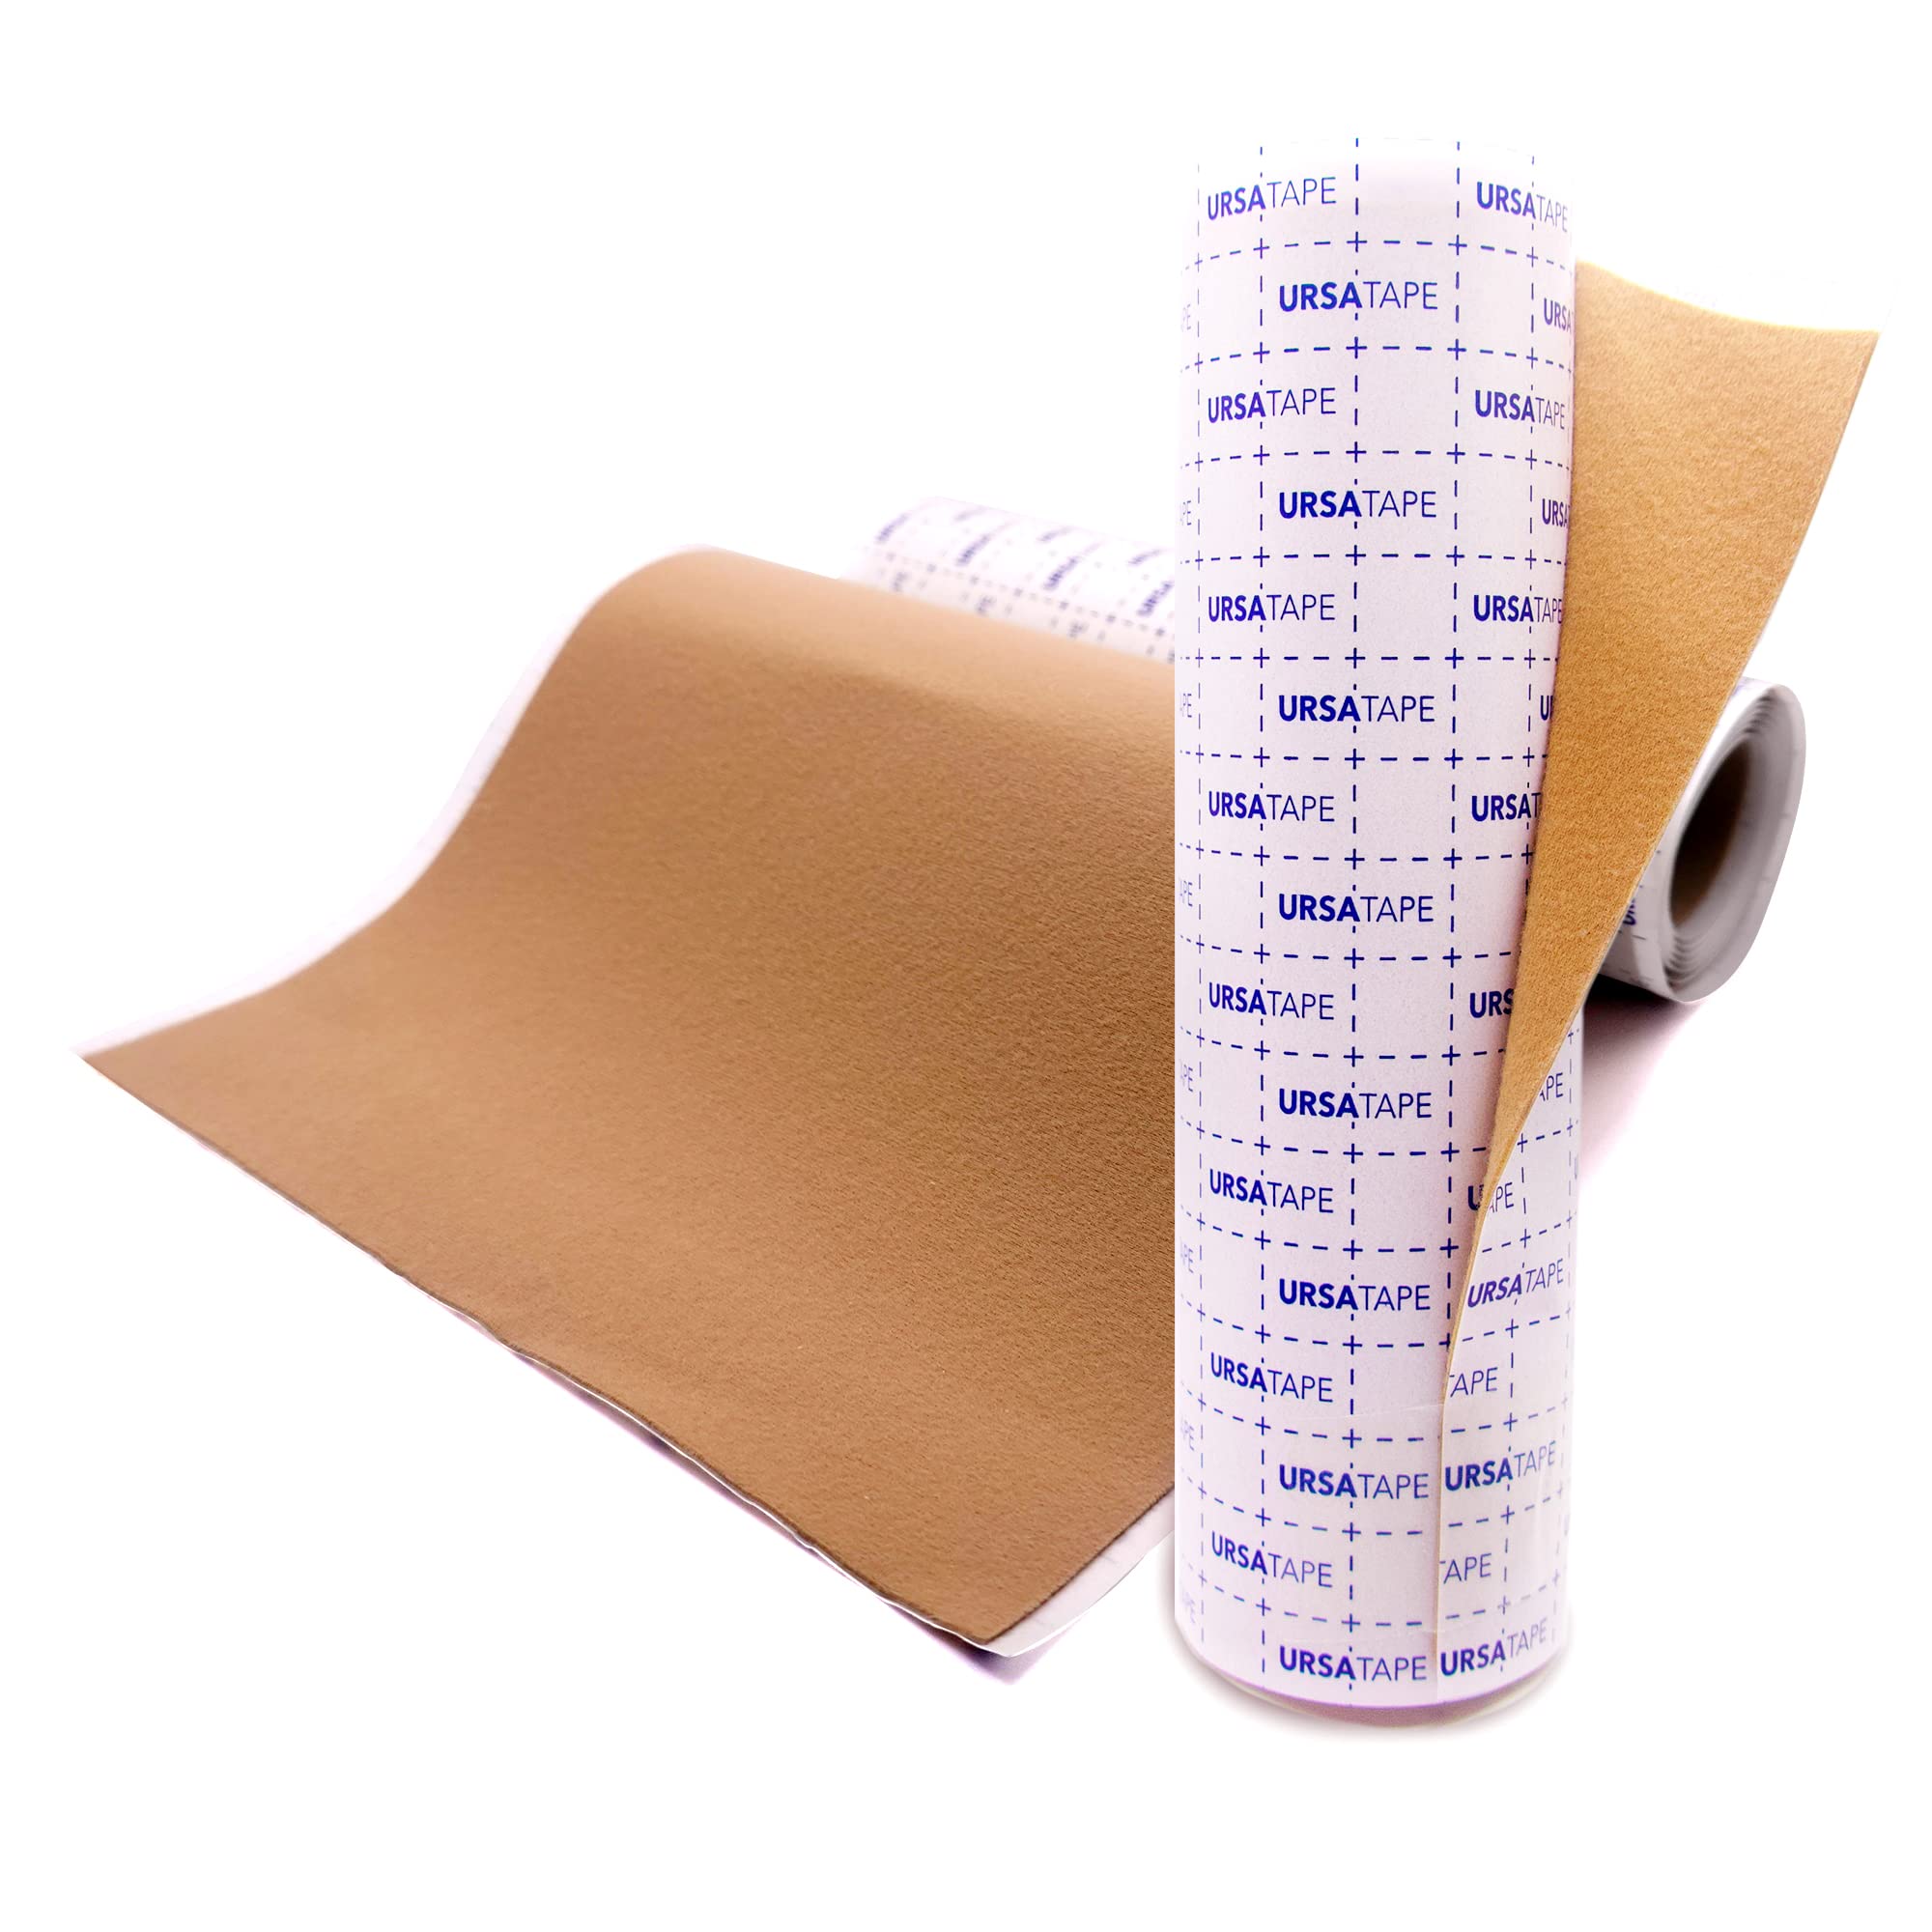 URSA Tape Stretchy Moleskin Fabric Tape Roll Heavy-Duty No-Residue Fashion  Tape and Body Tape for Fabric Shoes Skin and More Beige 100x15 Centimeters  (39 x 6 inches)